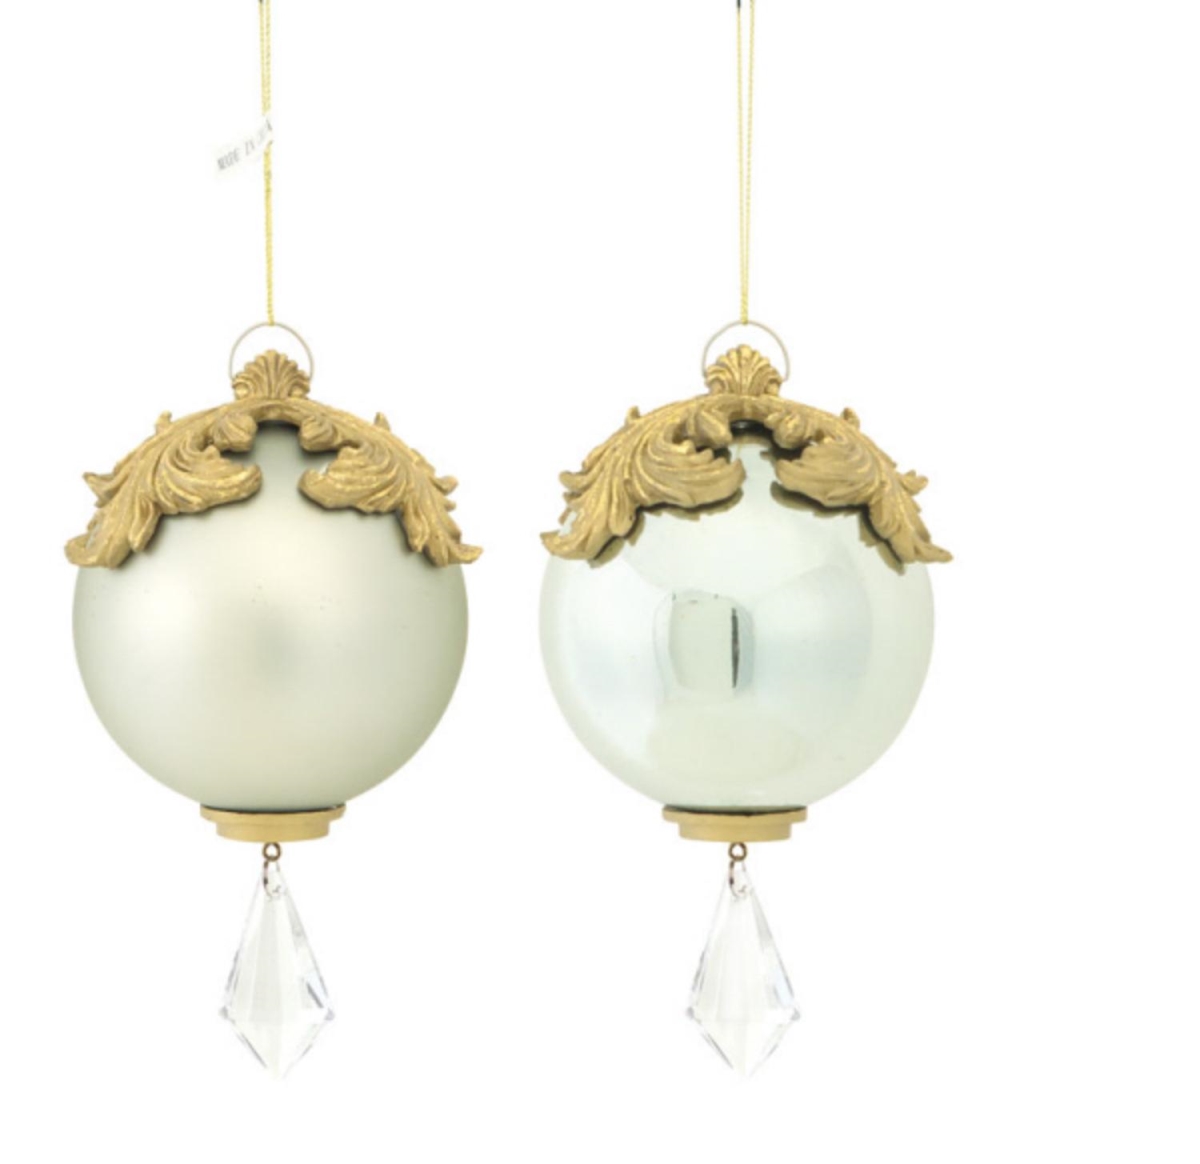 31465901 6.5 In. Silver & Gold Raised Acanthus Leaf With Clear Jewel Dangle Christmas Ornament, Set Of 2